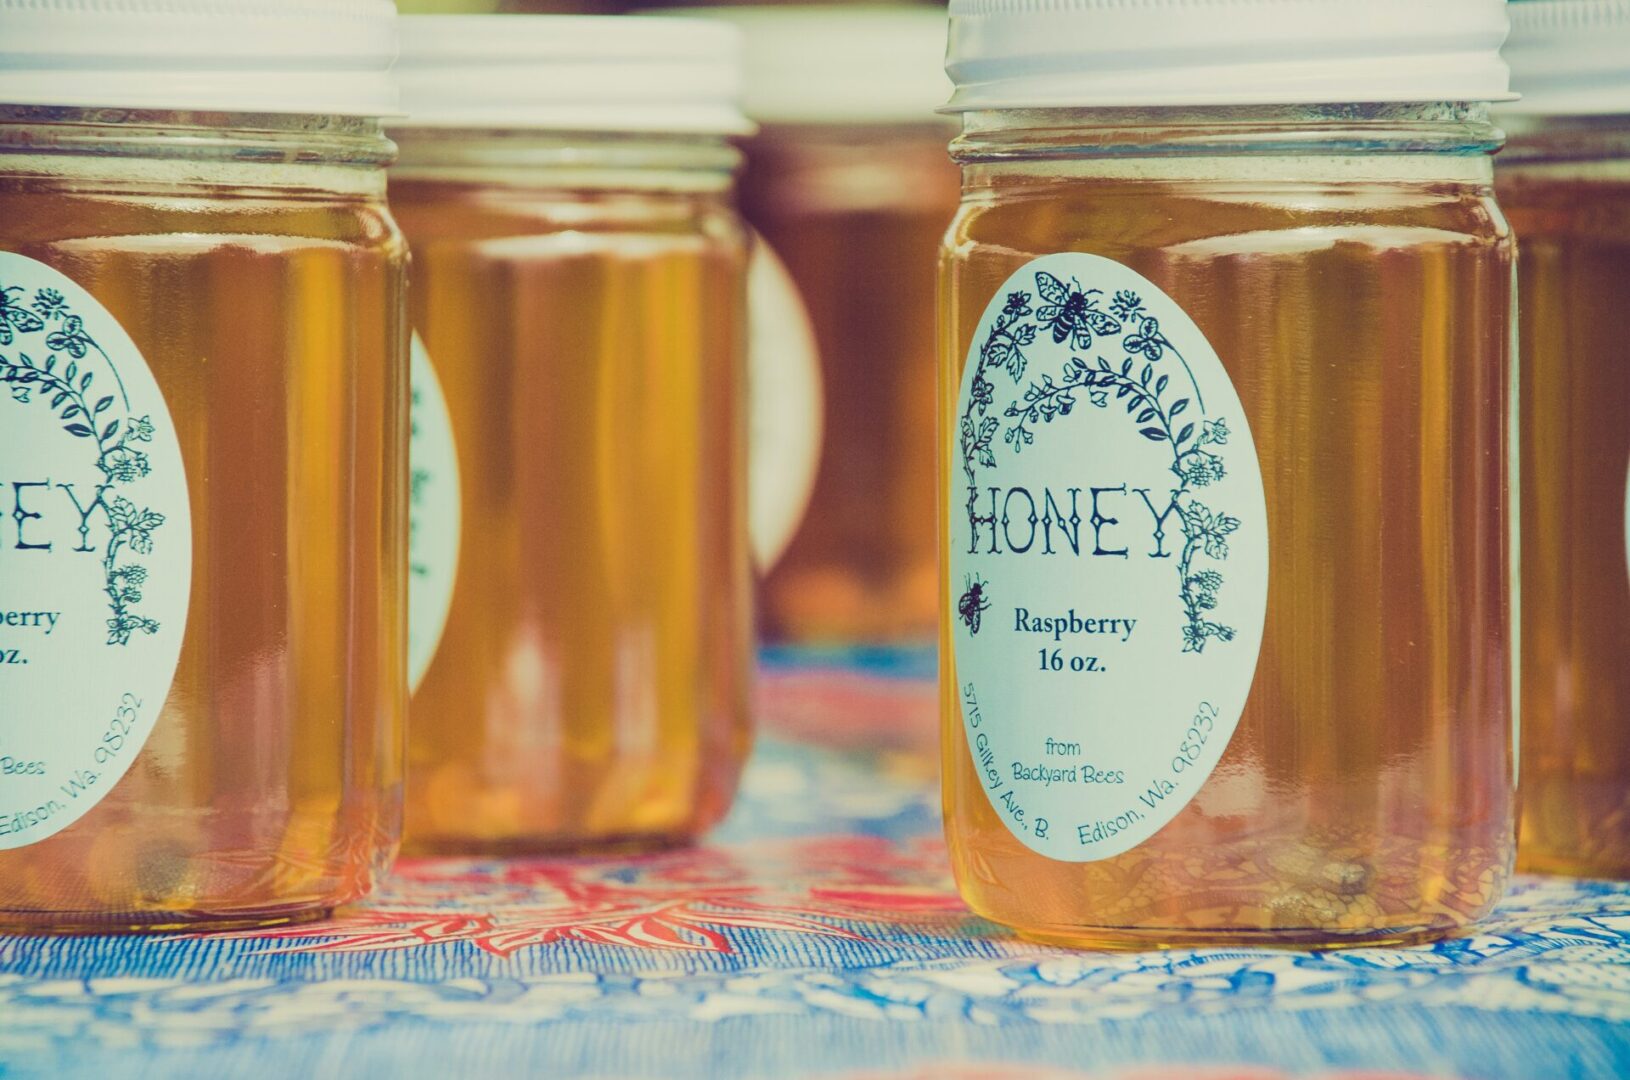 A close up of jars with honey on them